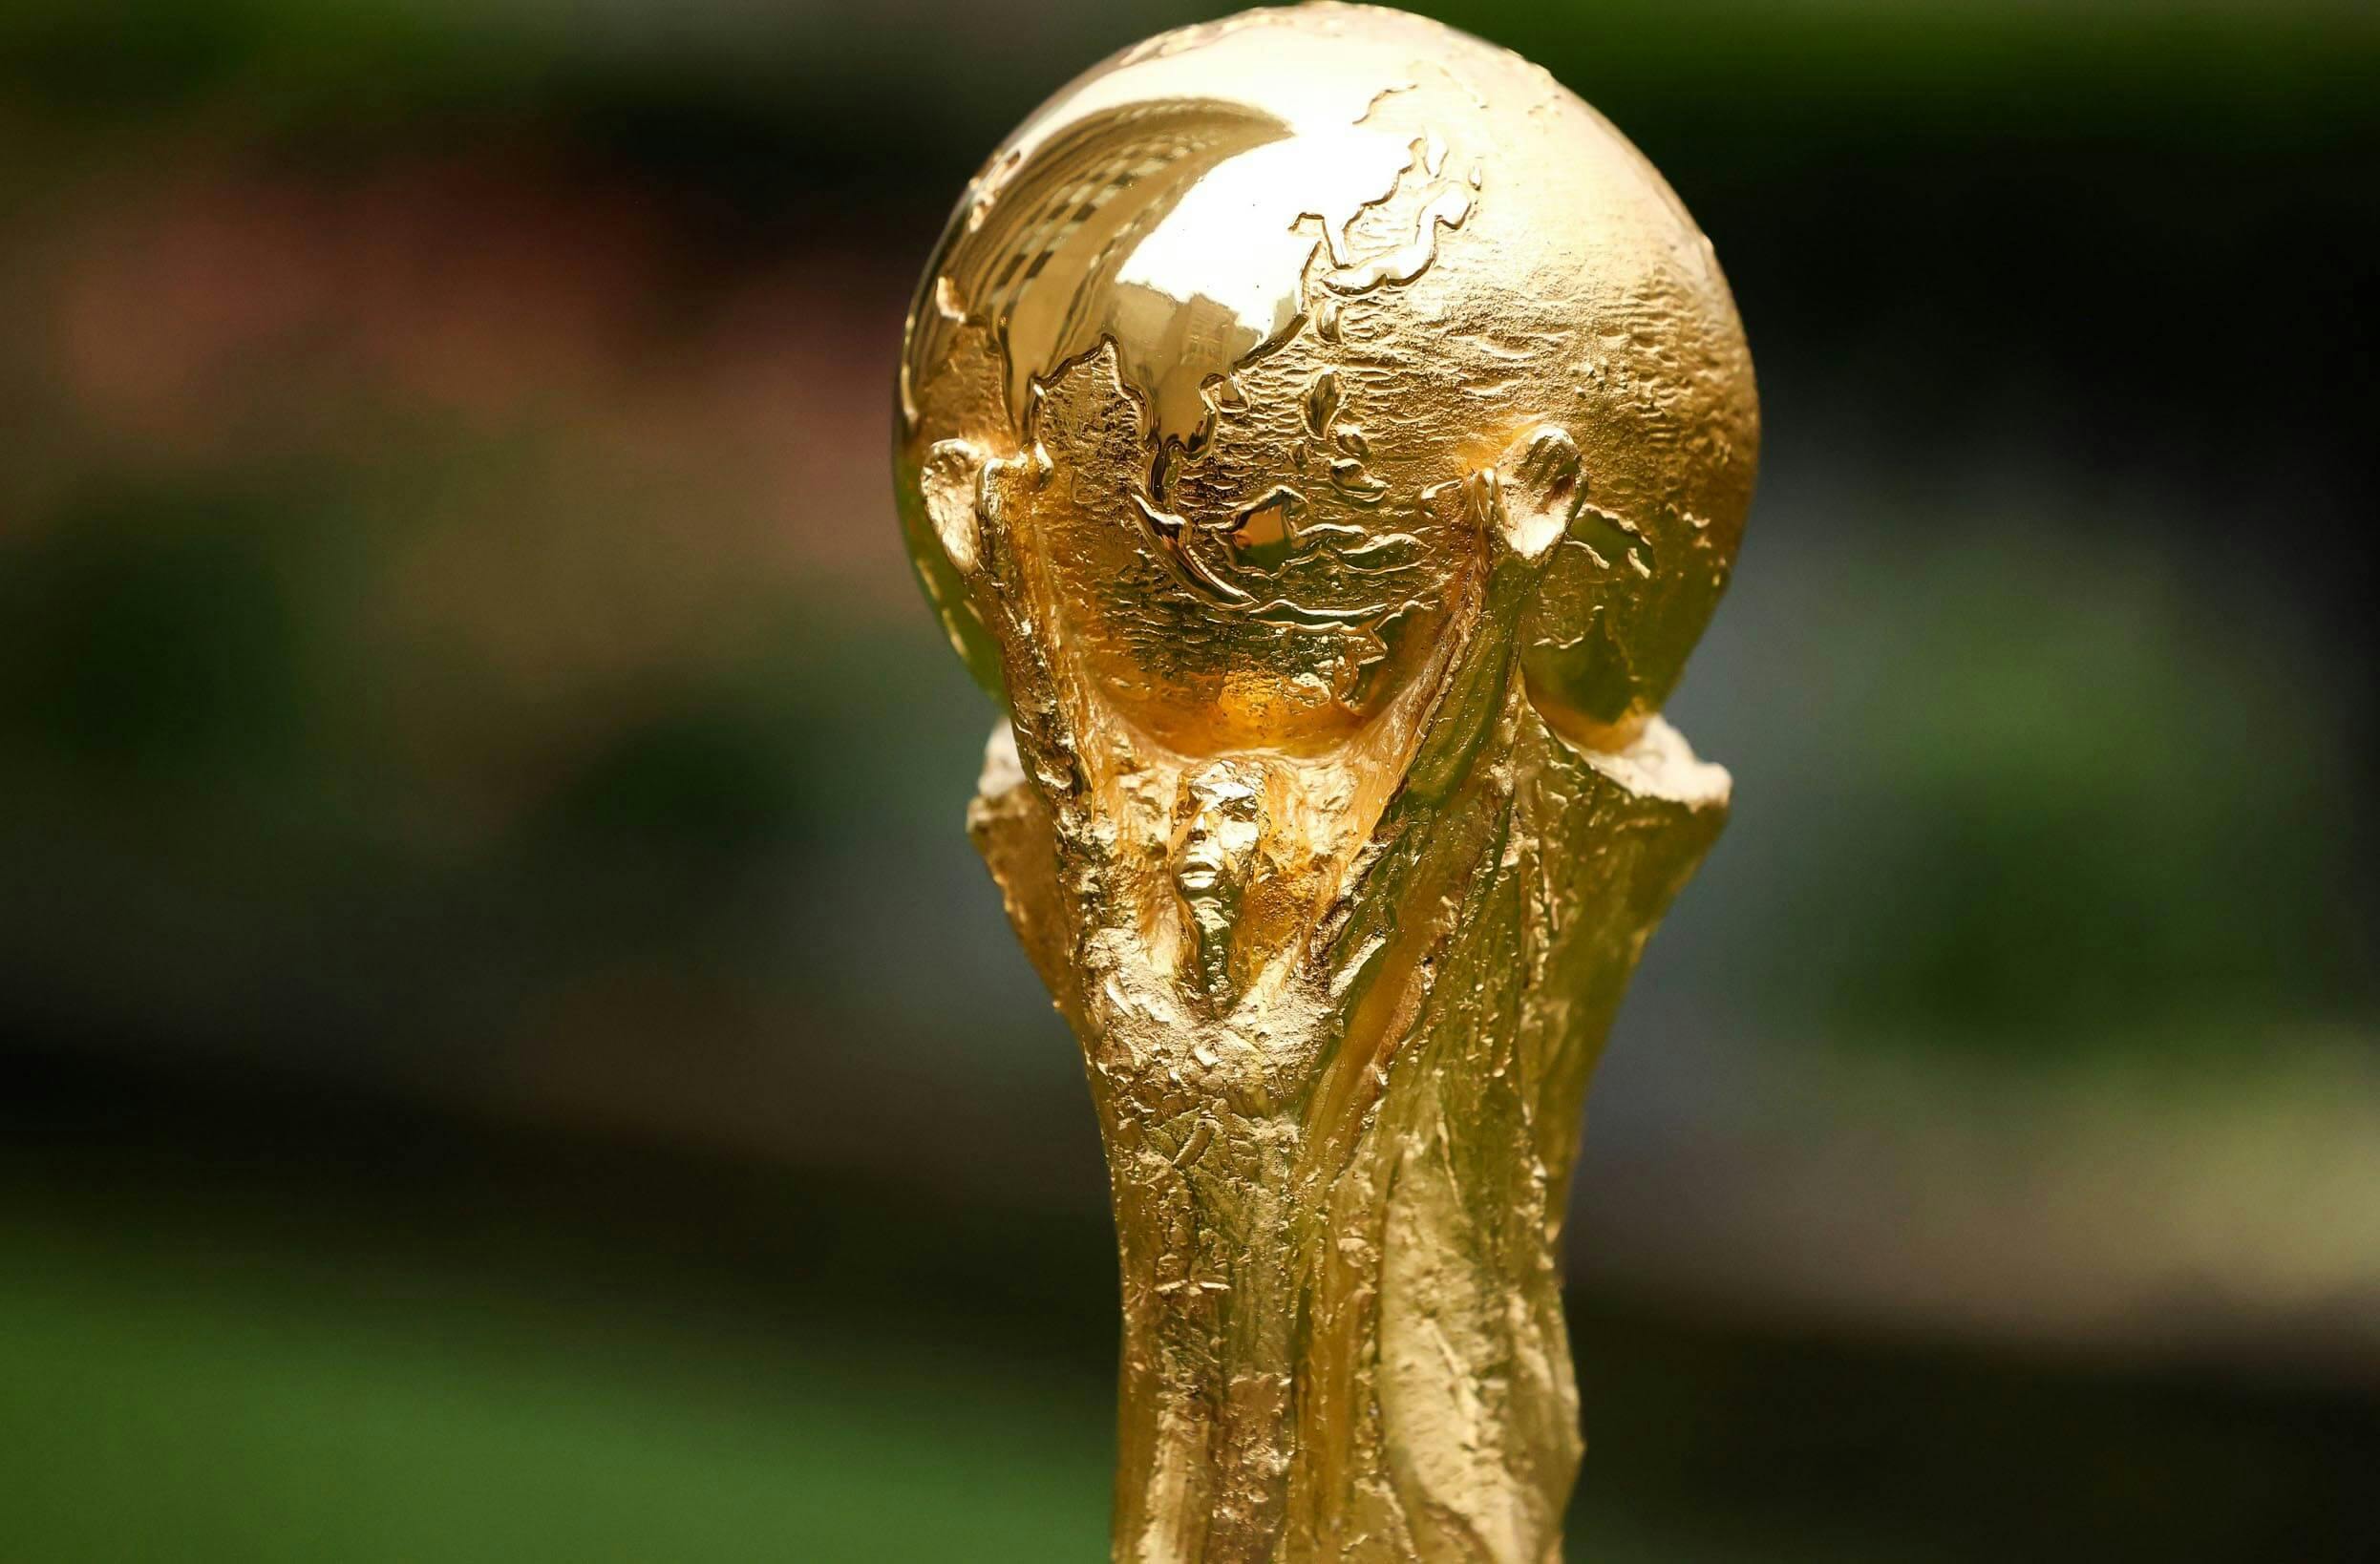 World Cup bracket: Final Group G standings and who advances to